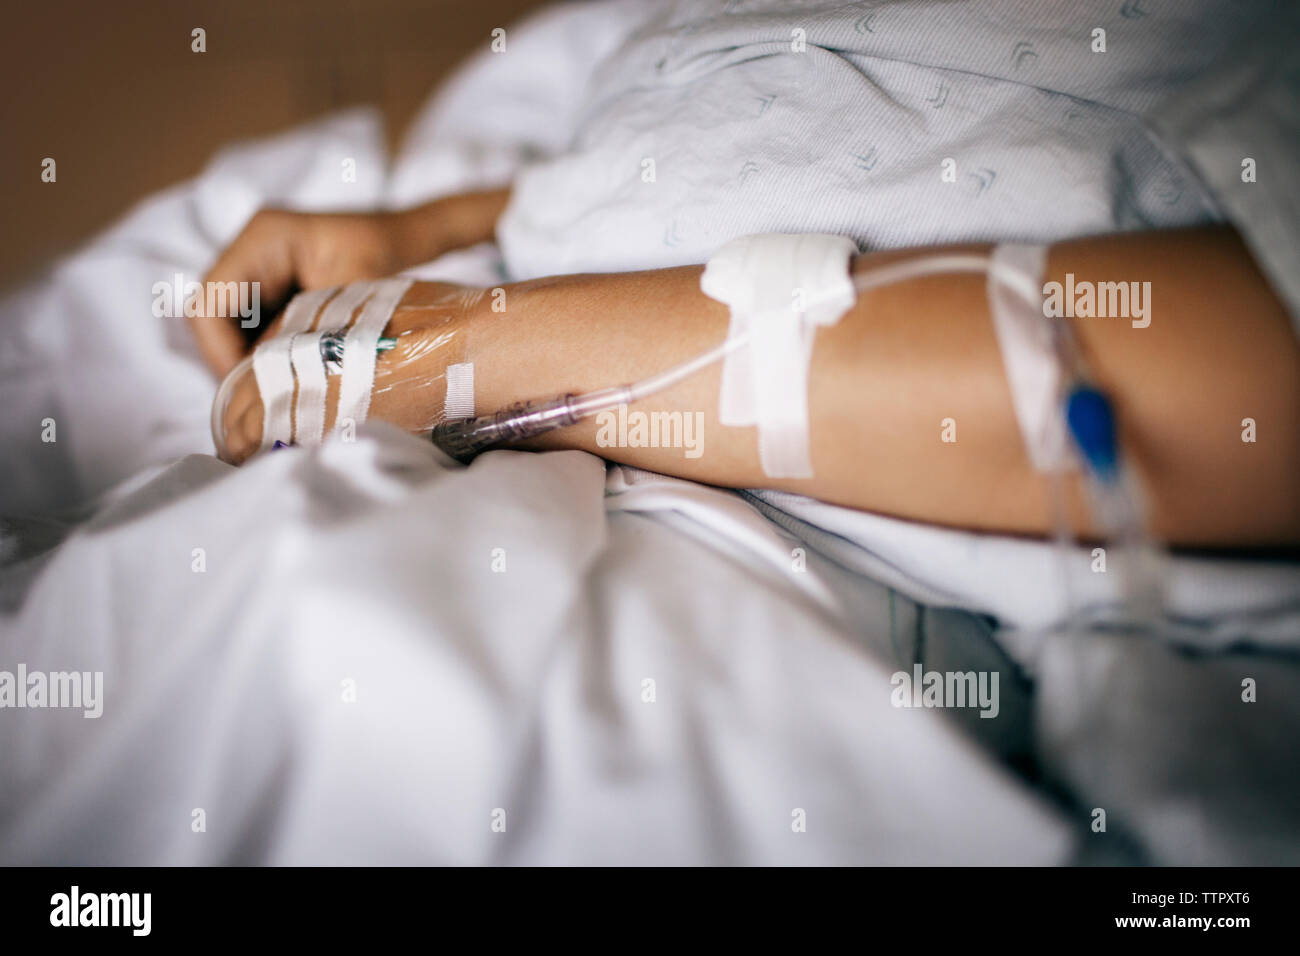 IV drips attached to woman's hand in hospital Stock Photo